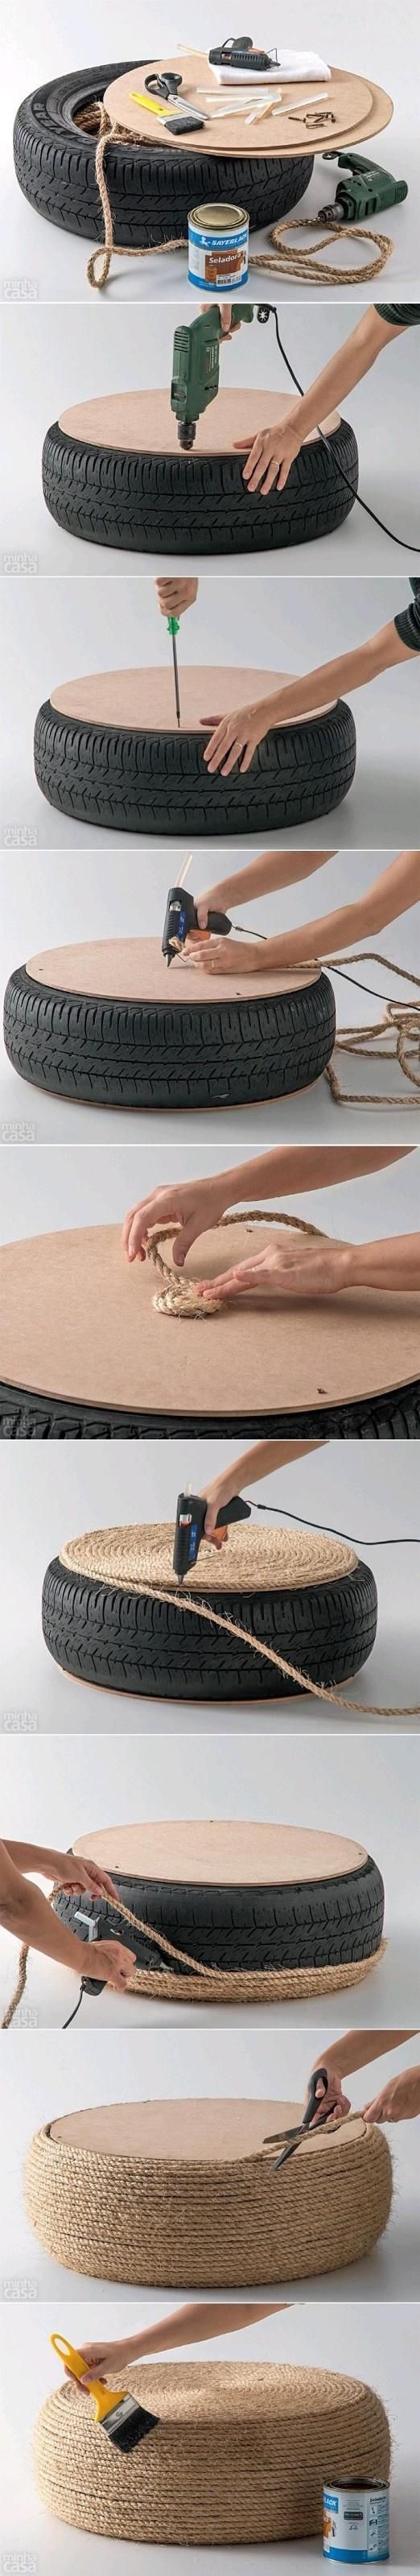 DIY Nautical Rope Ottoman – recycled tire.